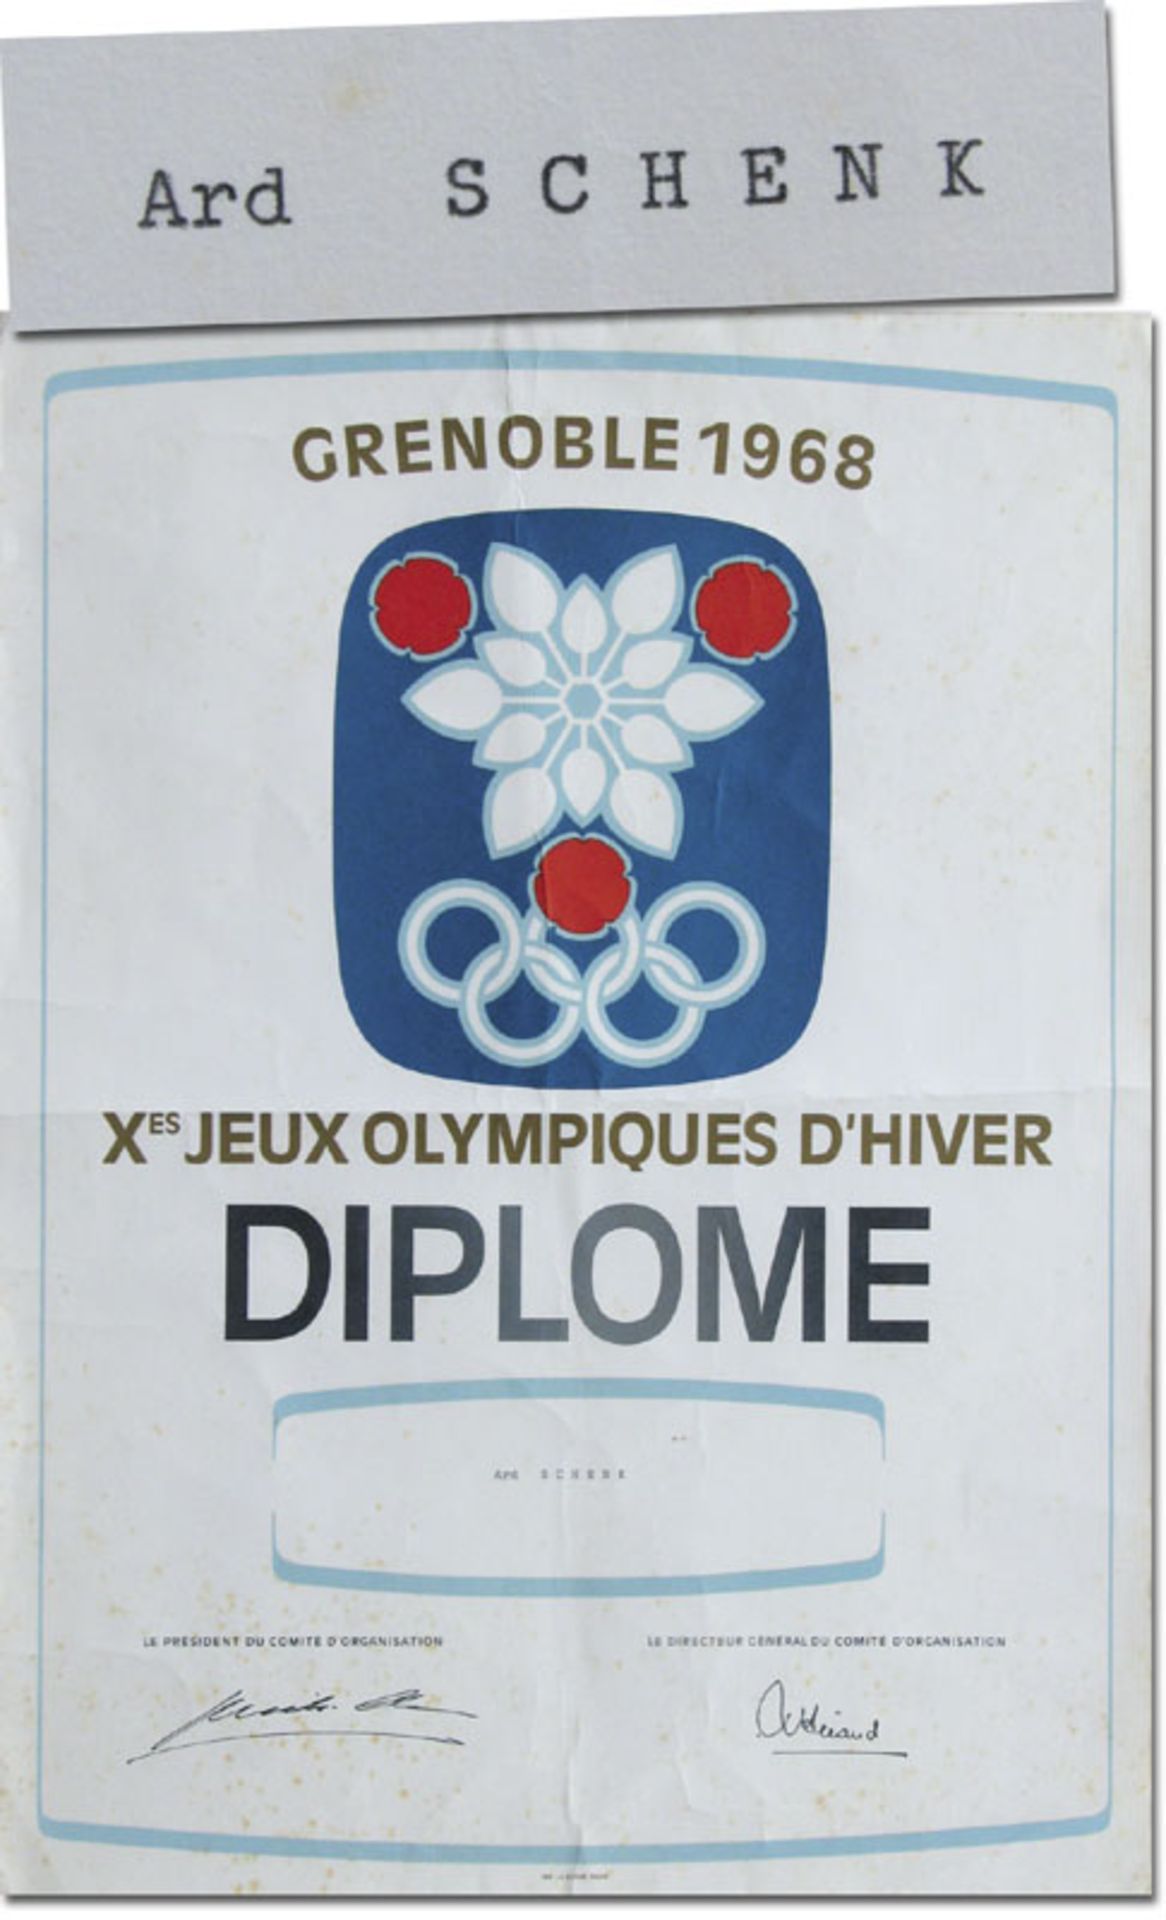 Olympiadiplom OSW1968 - Teilnehmerdiplom „Grenoble 1968. Xes Jeux Olympiques D'hiver. Diplome Ard Sc